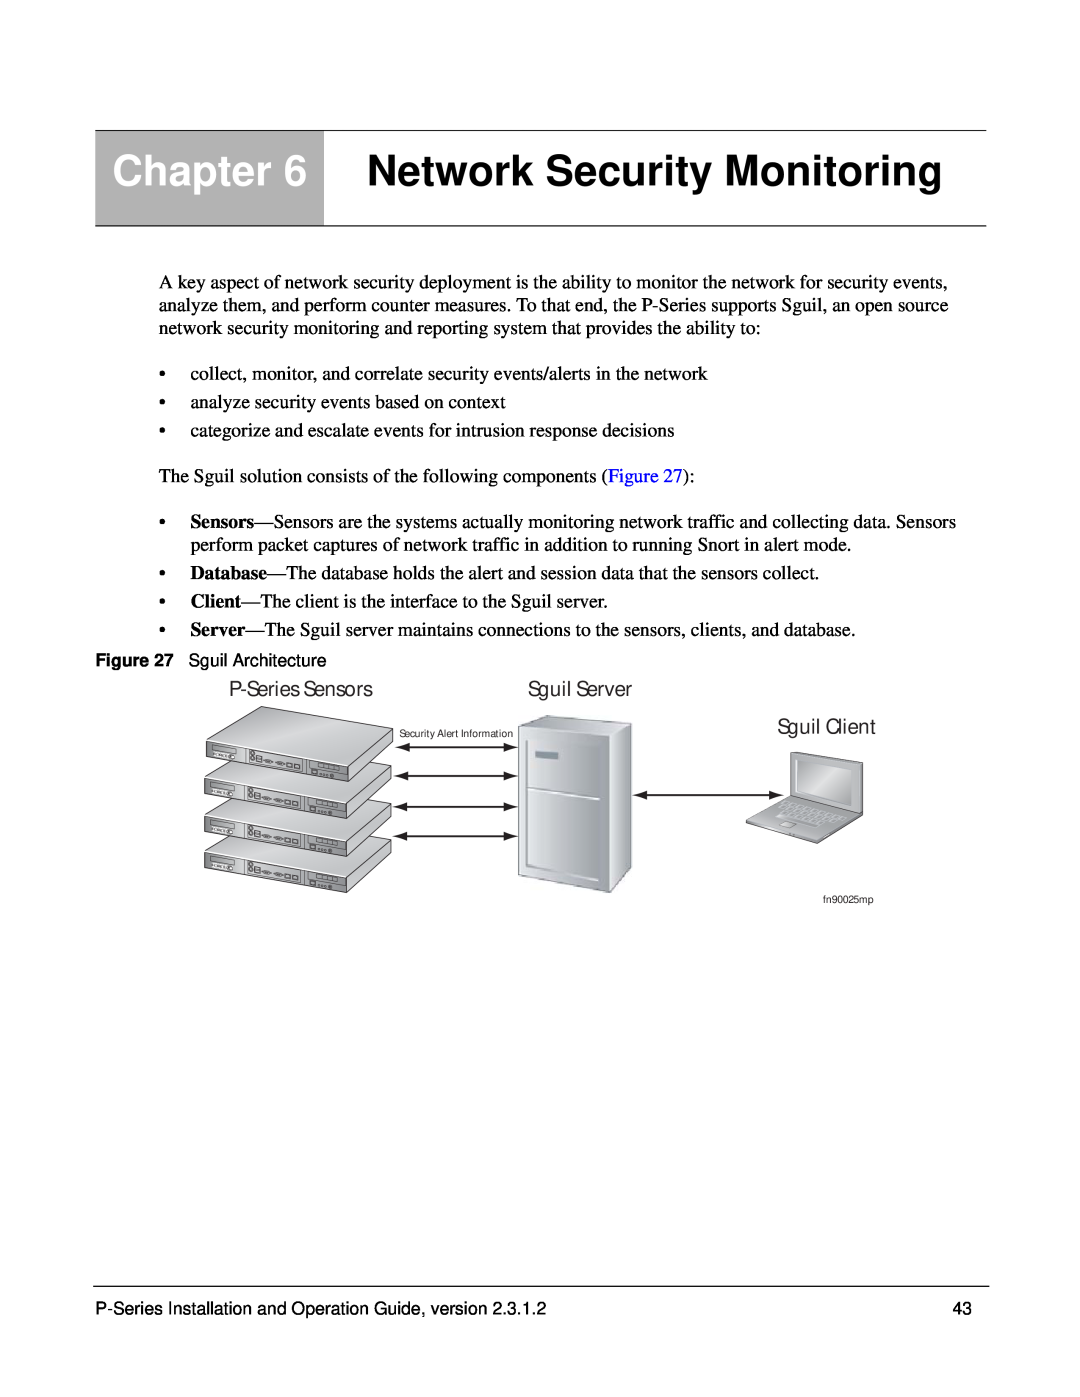 Force10 Networks 100-00055-01 manual Network Security Monitoring, P-Series Sensors, Sguil Server, Sguil Client 